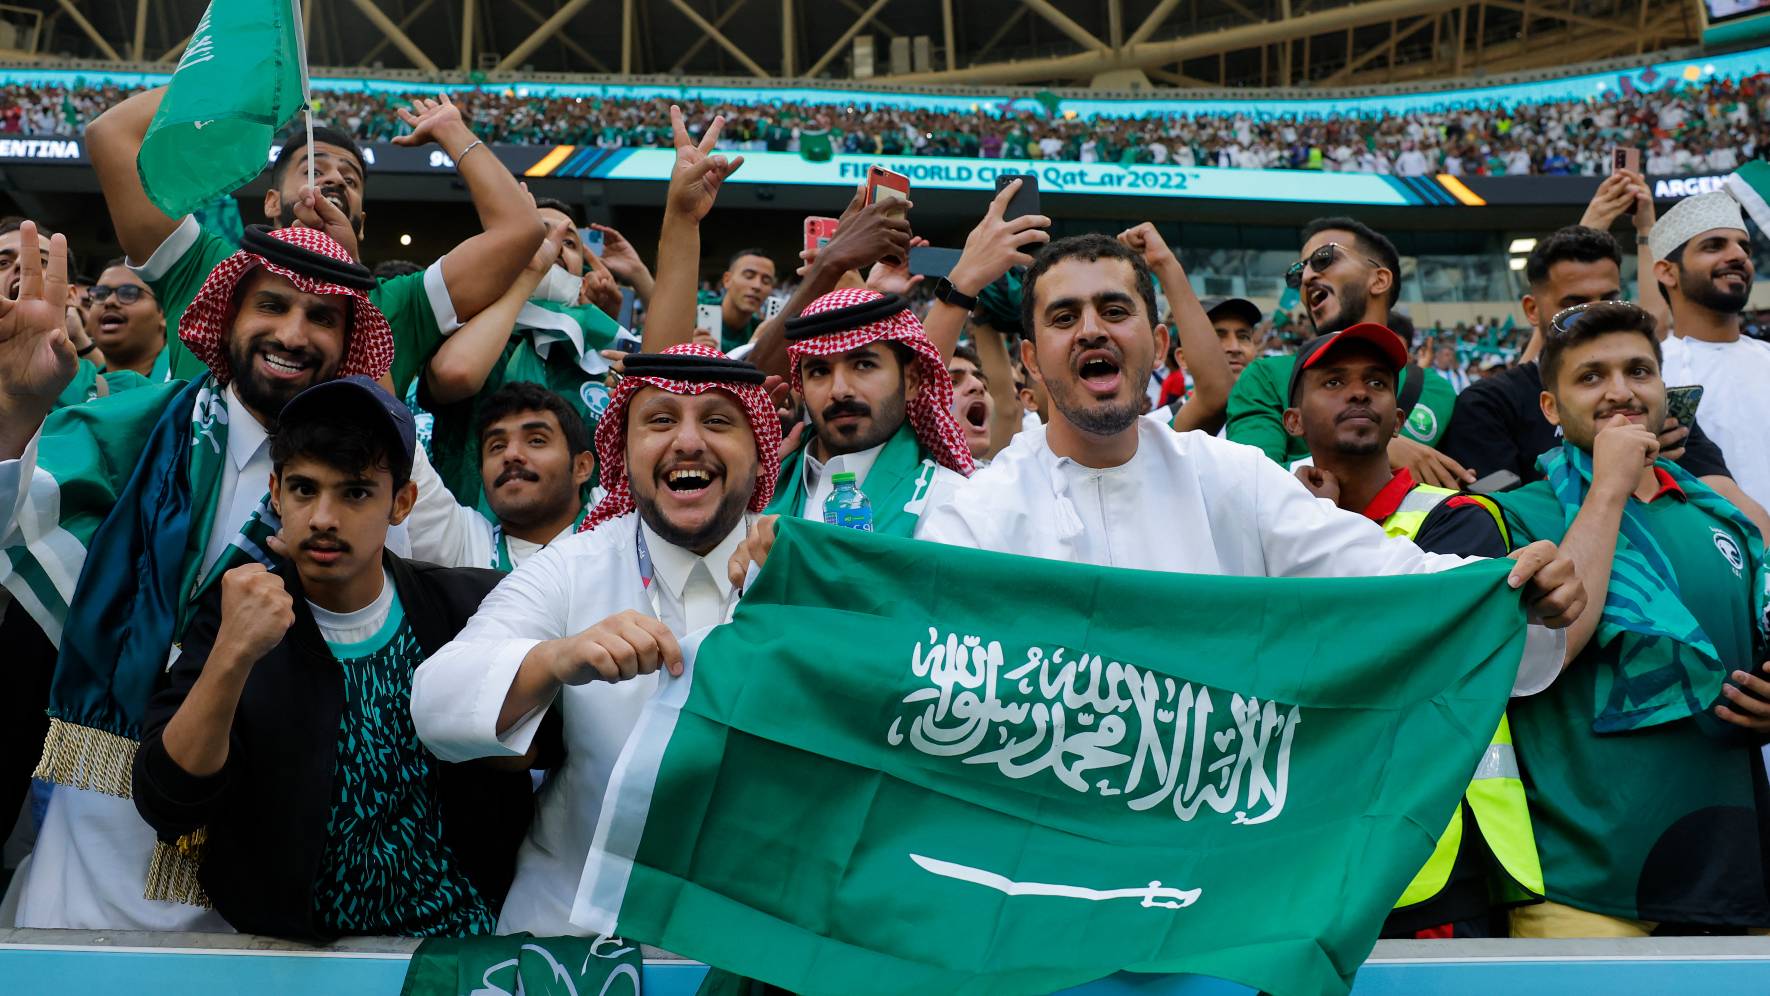 World Cup 2022 Yemens Houthis congratulate Saudi Arabia for win over Argentina Middle East Eye